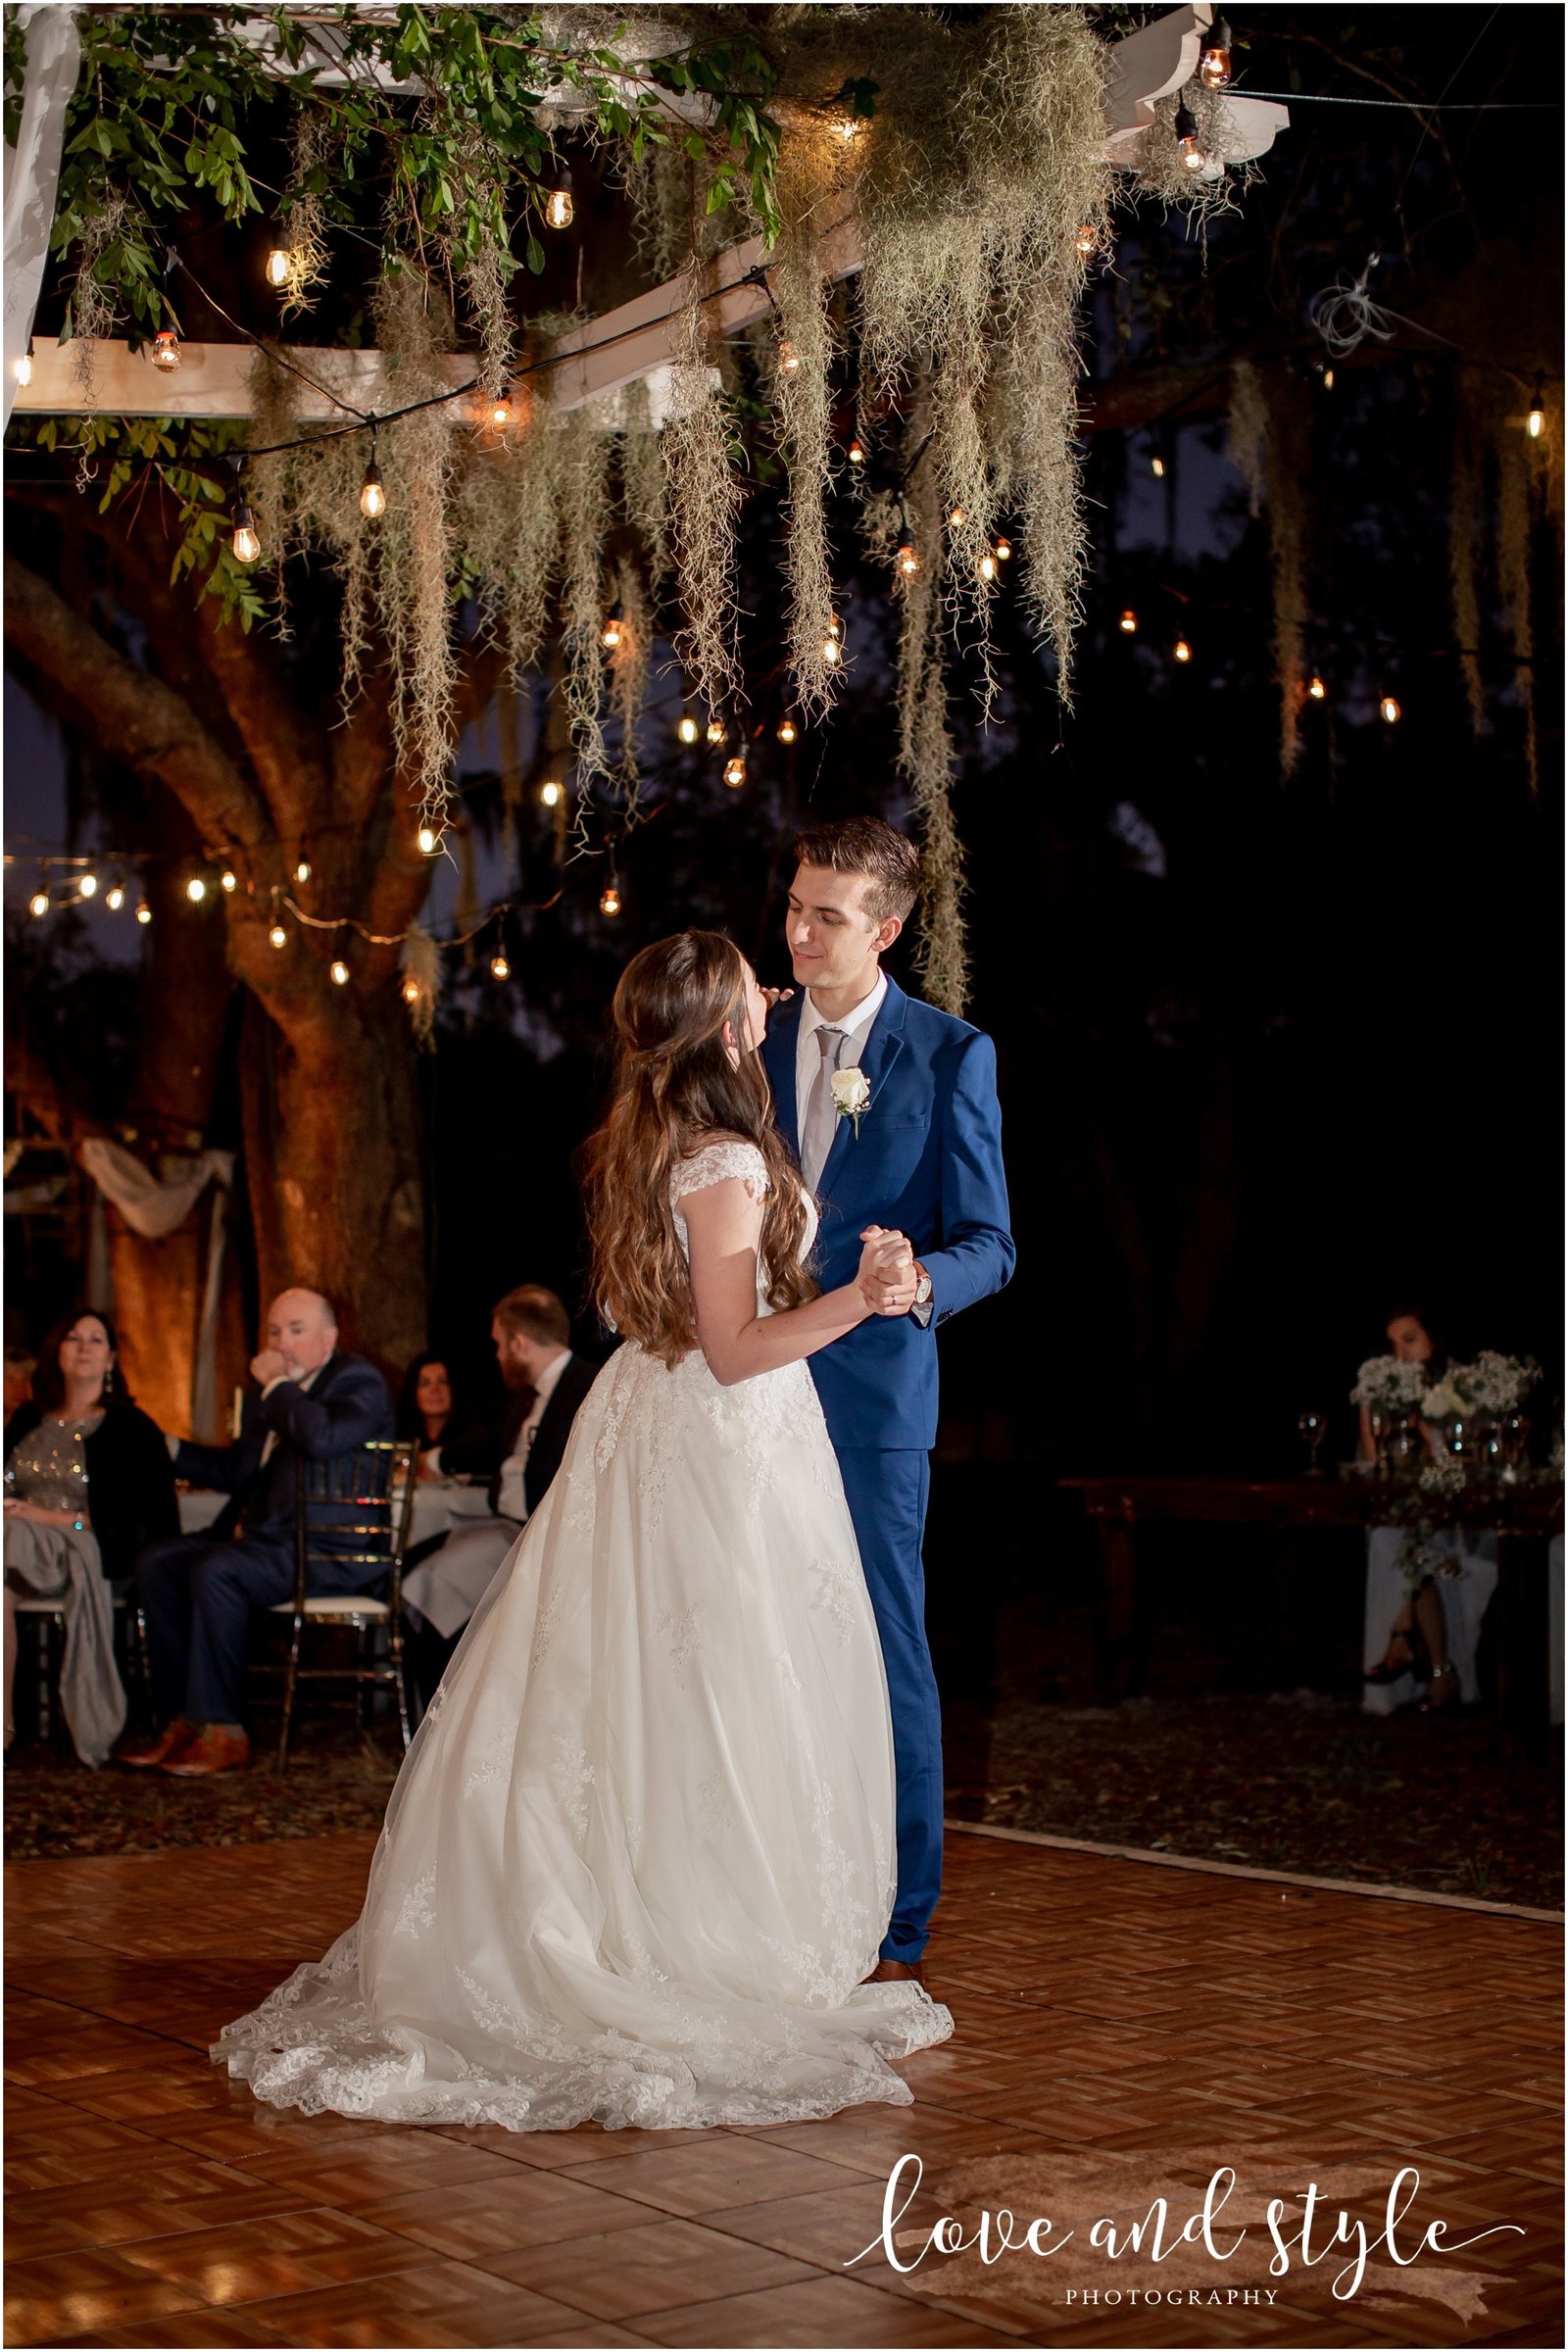 Bride and Groom dancing for the first time as husband and wife  at The Barn at Chapel Creek Wedding venue in Venice, Florida